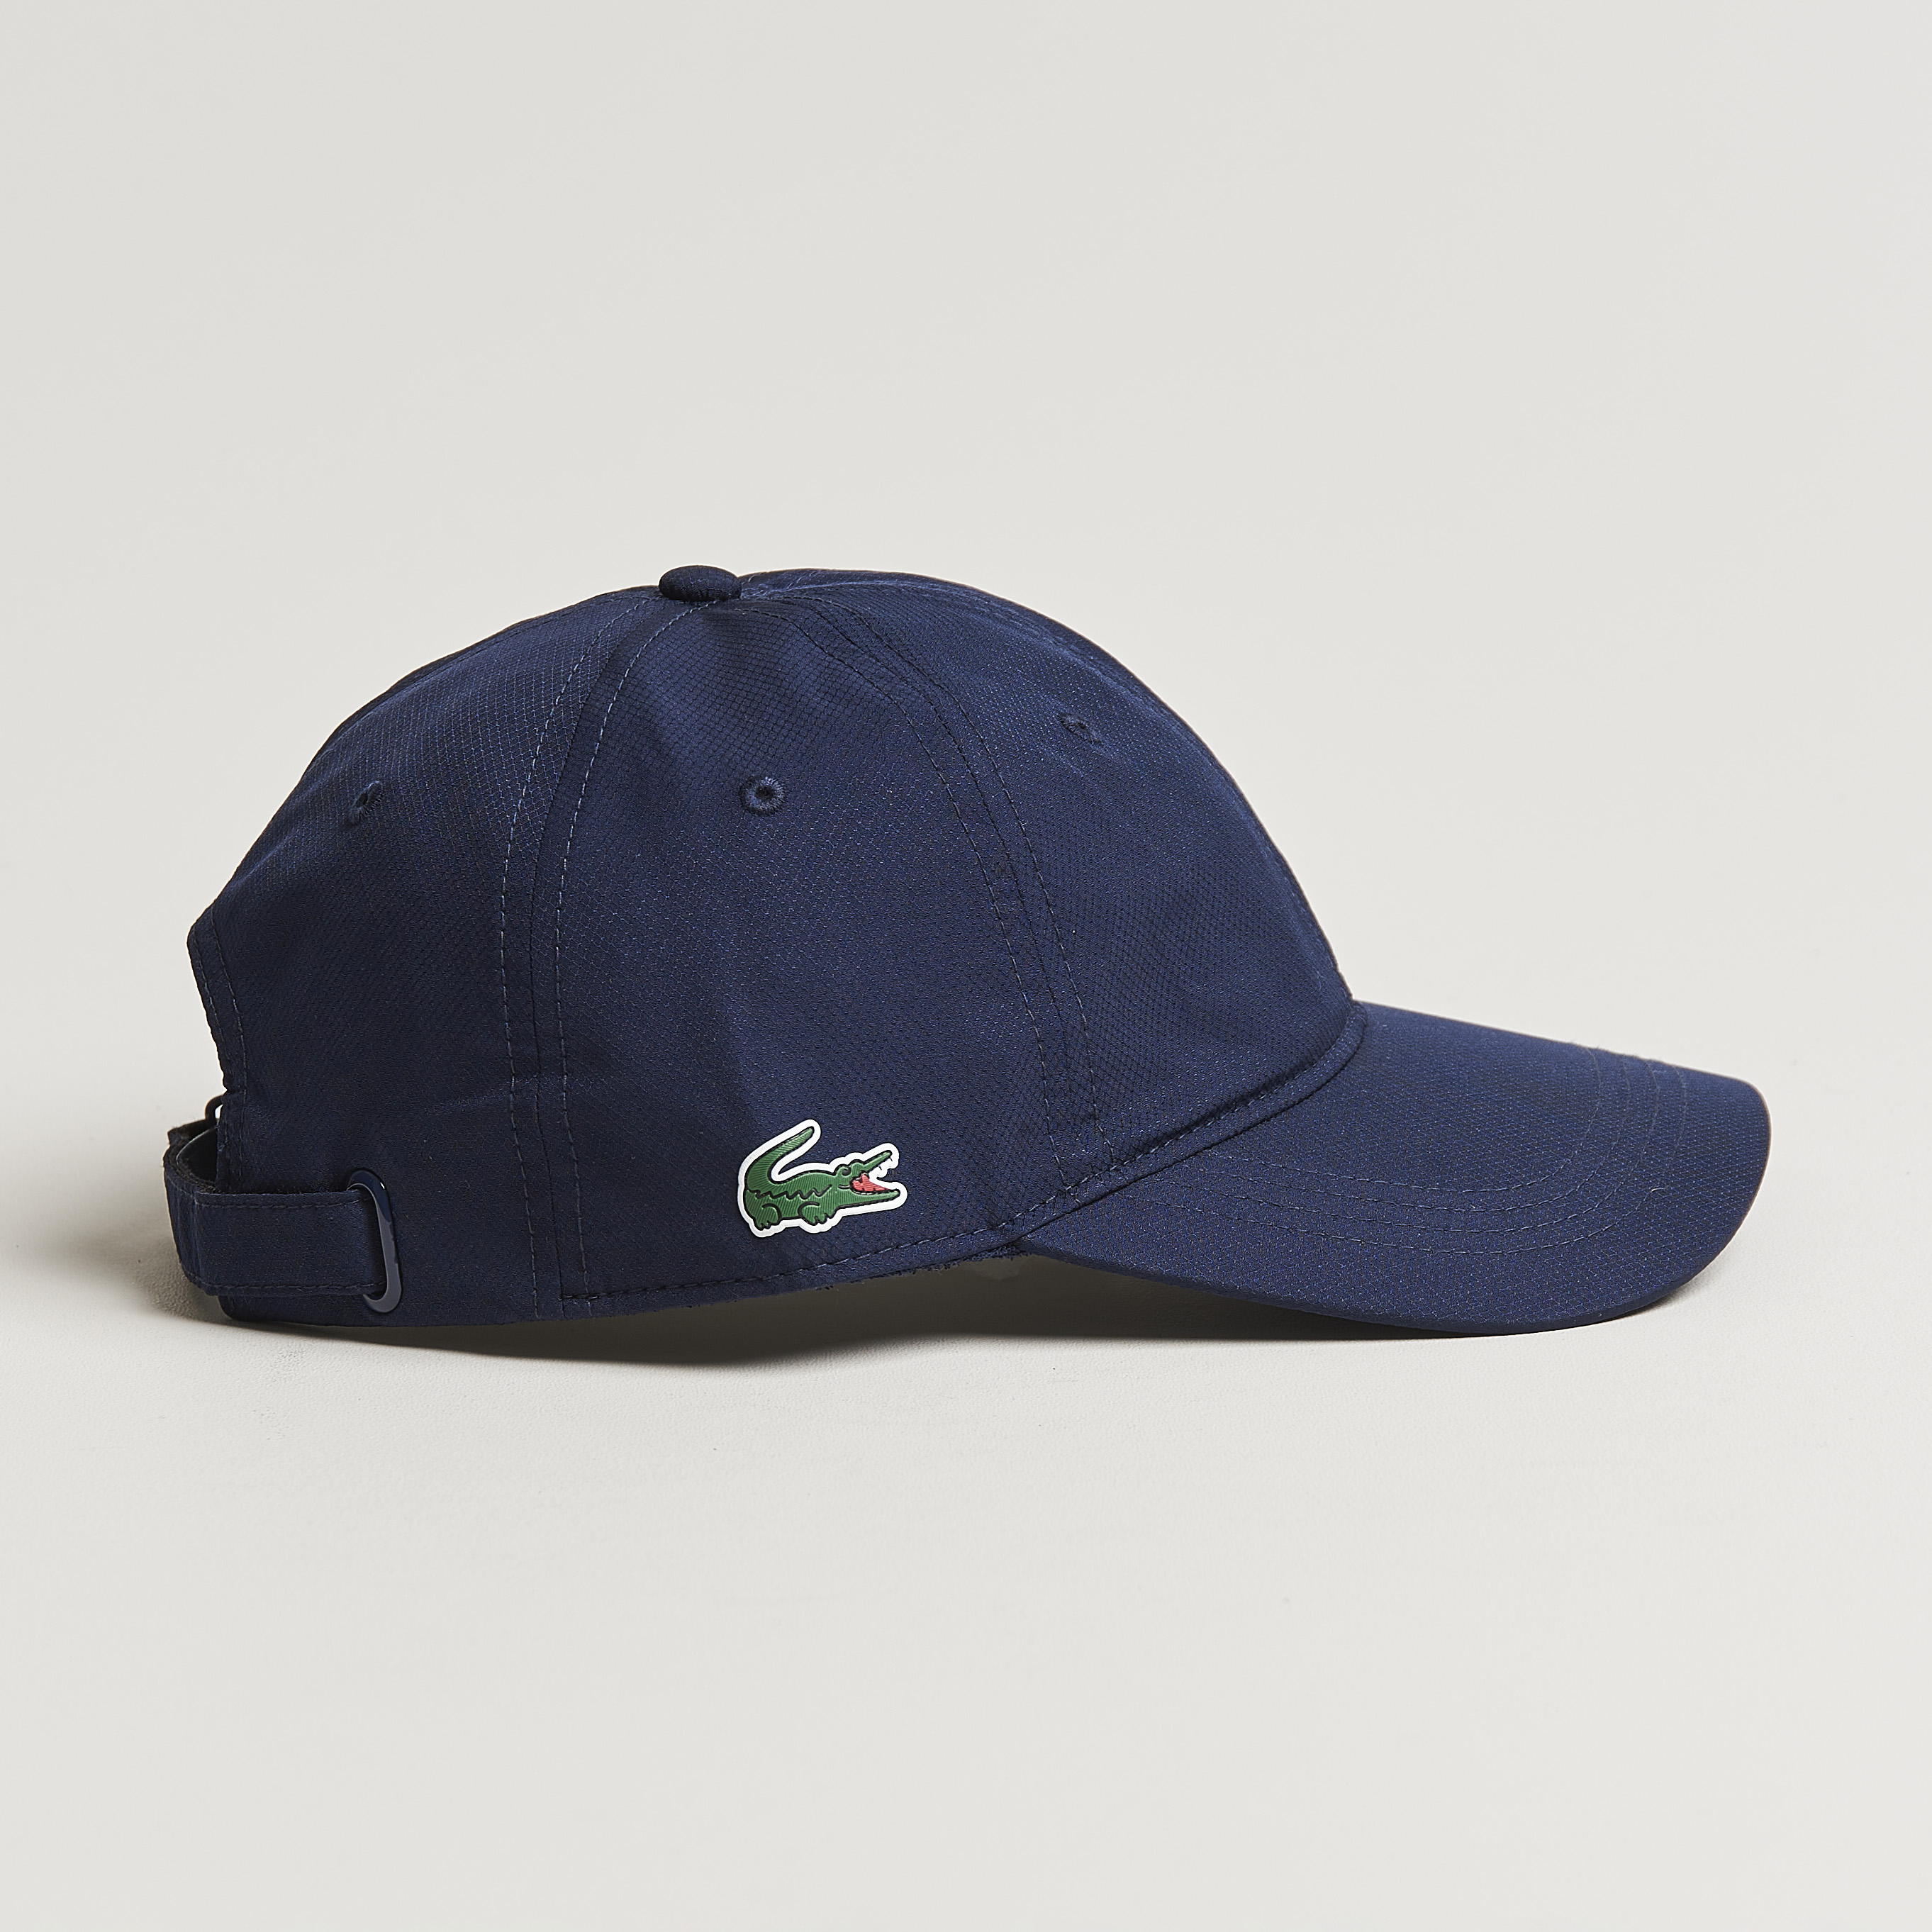 Lacoste Sport Sports Cap Navy at